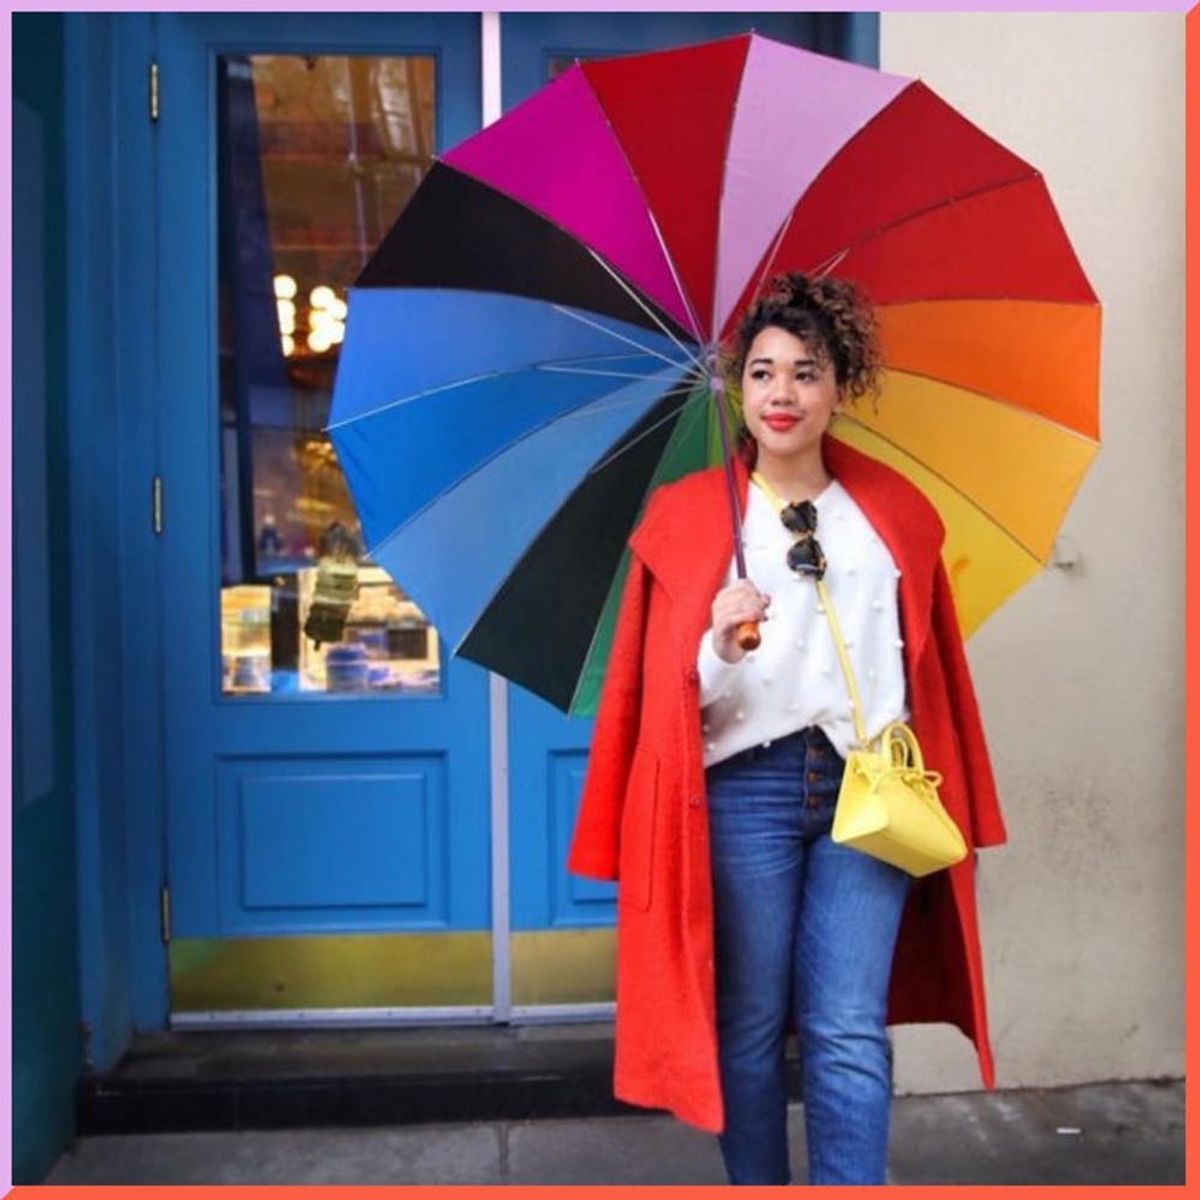 11 Ways to Conquer April Showers in Style, According to Instagram